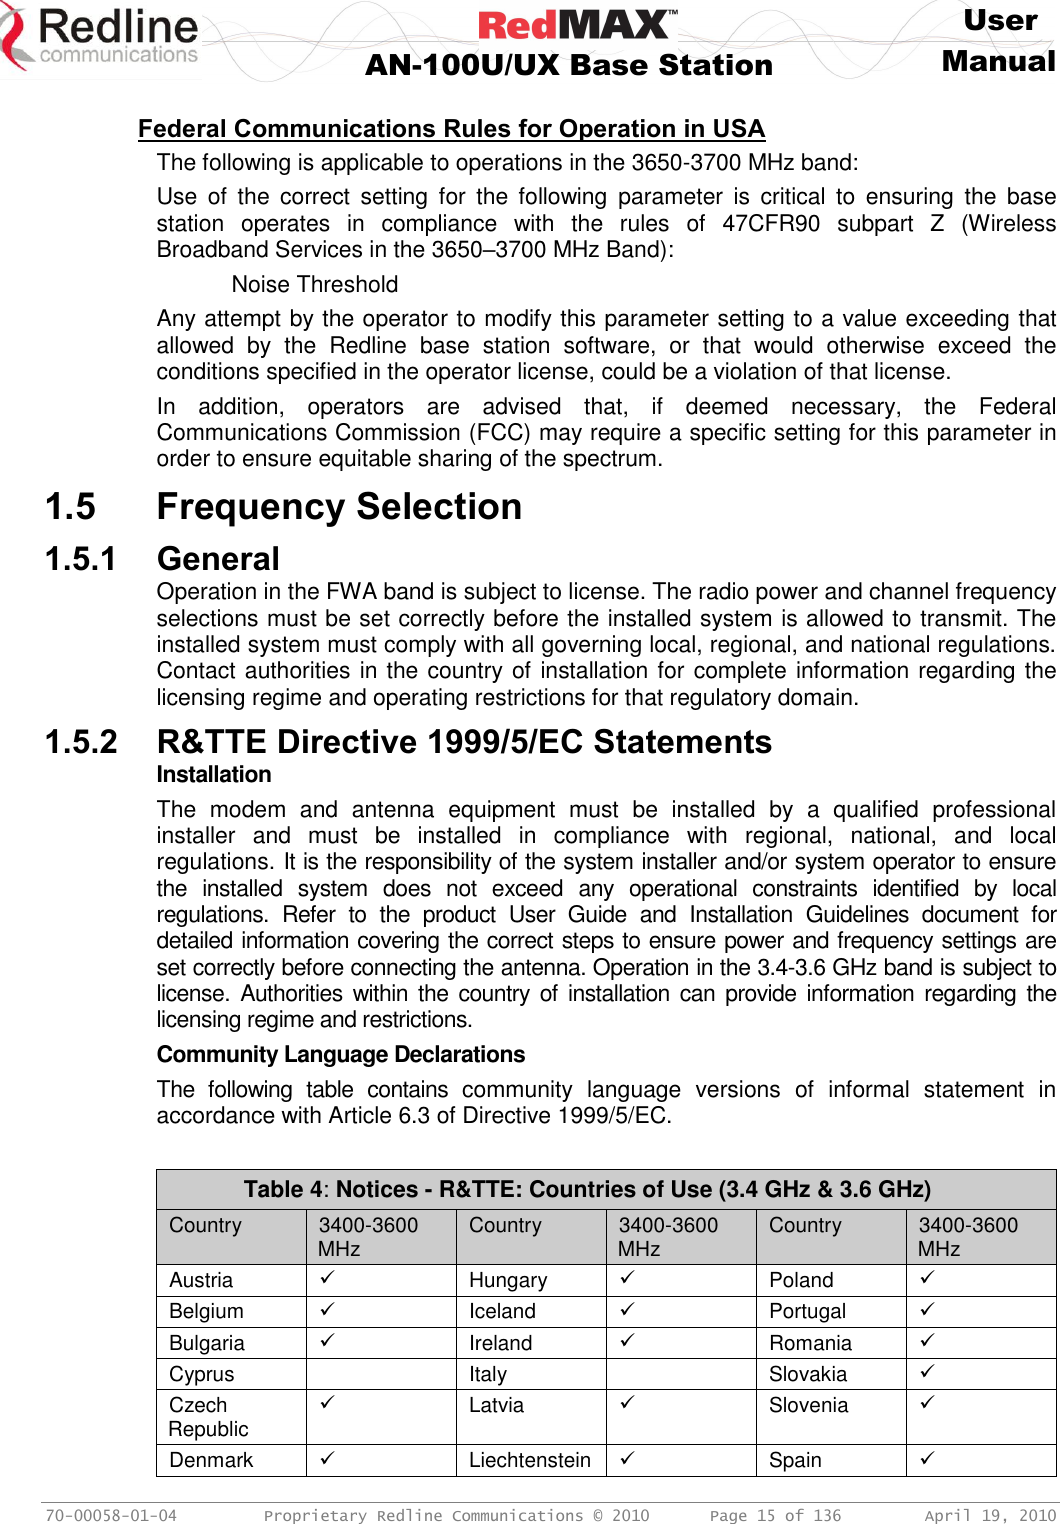     User  AN-100U/UX Base Station Manual   70-00058-01-04  Proprietary Redline Communications © 2010   Page 15 of 136  April 19, 2010  Federal Communications Rules for Operation in USA The following is applicable to operations in the 3650-3700 MHz band: Use  of  the  correct  setting  for  the  following  parameter  is  critical  to  ensuring  the  base station  operates  in  compliance  with  the  rules  of  47CFR90  subpart  Z  (Wireless Broadband Services in the 3650–3700 MHz Band):   Noise Threshold Any attempt by the operator to modify this parameter setting to a value exceeding that allowed  by  the  Redline  base  station  software,  or  that  would  otherwise  exceed  the conditions specified in the operator license, could be a violation of that license. In  addition,  operators  are  advised  that,  if  deemed  necessary,  the  Federal Communications Commission (FCC) may require a specific setting for this parameter in order to ensure equitable sharing of the spectrum. 1.5 Frequency Selection 1.5.1 General Operation in the FWA band is subject to license. The radio power and channel frequency selections must be set correctly before the installed system is allowed to transmit. The installed system must comply with all governing local, regional, and national regulations. Contact authorities in the country of installation for complete information regarding the licensing regime and operating restrictions for that regulatory domain. 1.5.2 R&amp;TTE Directive 1999/5/EC Statements Installation The  modem  and  antenna  equipment  must  be  installed  by  a  qualified  professional installer  and  must  be  installed  in  compliance  with  regional,  national,  and  local regulations. It is the responsibility of the system installer and/or system operator to ensure the  installed  system  does  not  exceed  any  operational  constraints  identified  by  local regulations.  Refer  to  the  product  User  Guide  and  Installation  Guidelines  document  for detailed information covering the correct steps to ensure power and frequency settings are set correctly before connecting the antenna. Operation in the 3.4-3.6 GHz band is subject to license.  Authorities within the  country  of installation  can provide information  regarding  the licensing regime and restrictions. Community Language Declarations The  following  table  contains  community  language  versions  of  informal  statement  in accordance with Article 6.3 of Directive 1999/5/EC.    Table 4: Notices - R&amp;TTE: Countries of Use (3.4 GHz &amp; 3.6 GHz) Country 3400-3600 MHz Country 3400-3600 MHz Country 3400-3600 MHz Austria  Hungary  Poland  Belgium  Iceland  Portugal  Bulgaria  Ireland  Romania  Cyprus  Italy  Slovakia  Czech Republic  Latvia  Slovenia  Denmark  Liechtenstein  Spain  